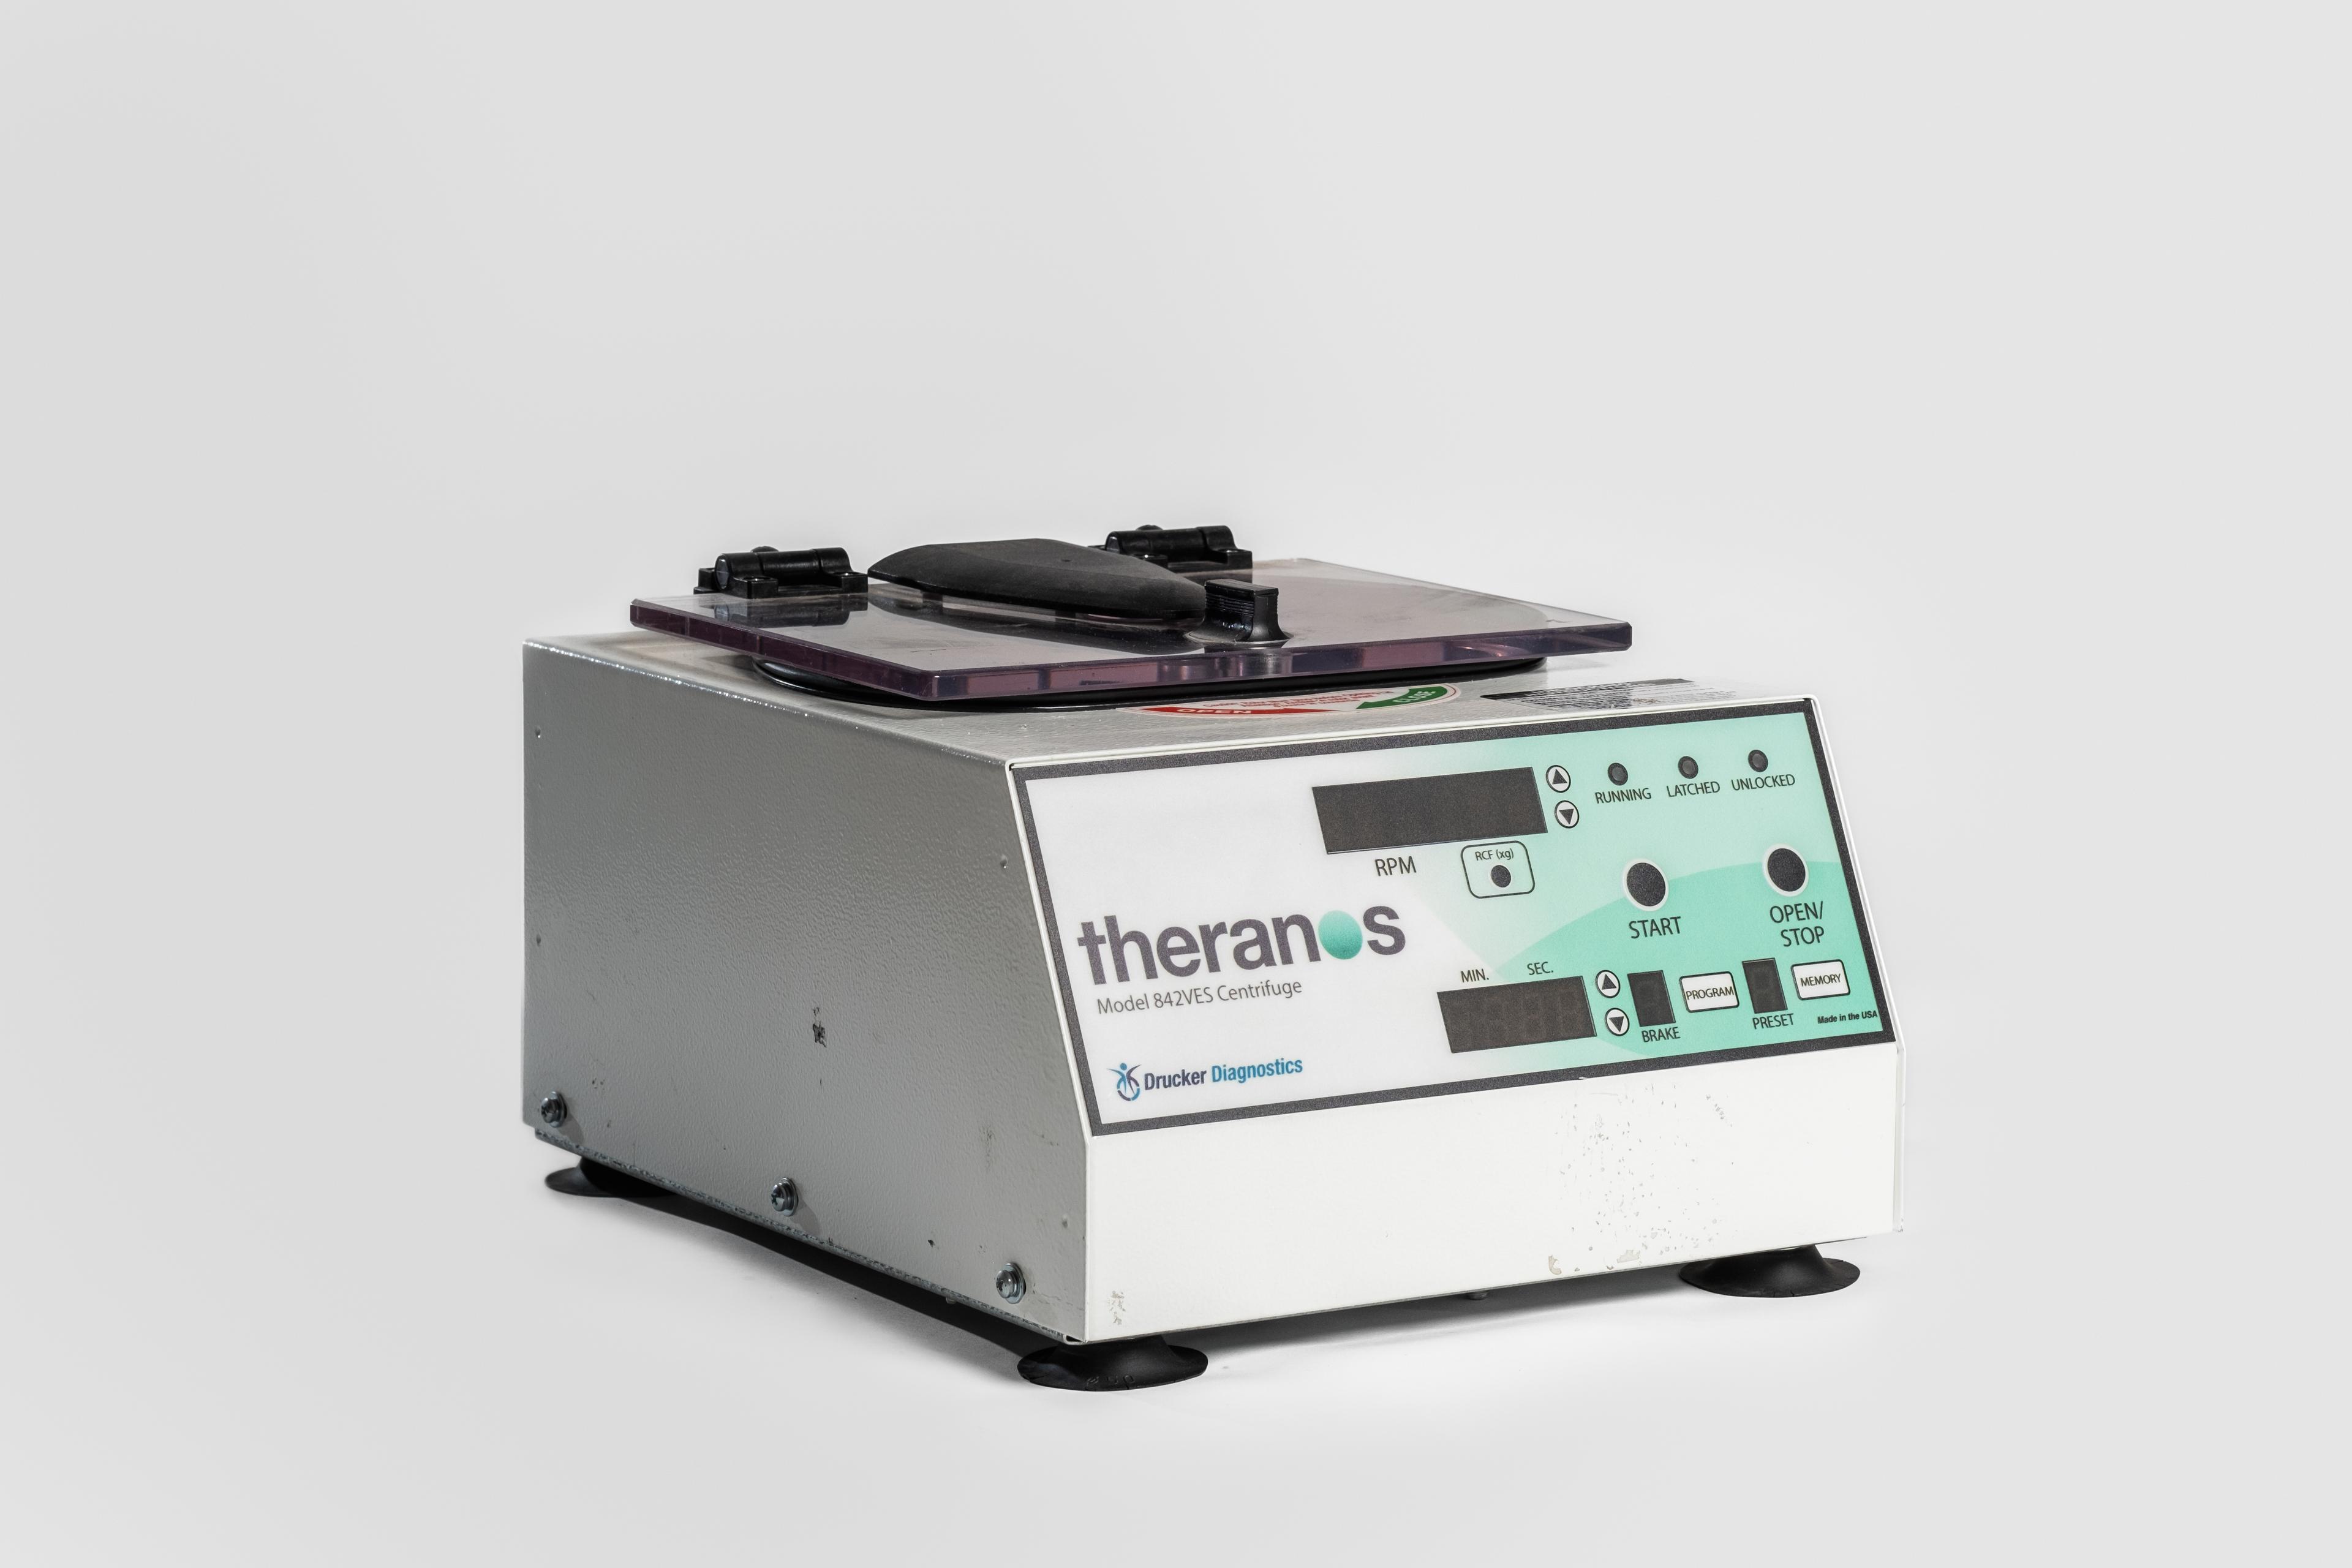 Theranos-branded centrifuge, angled view